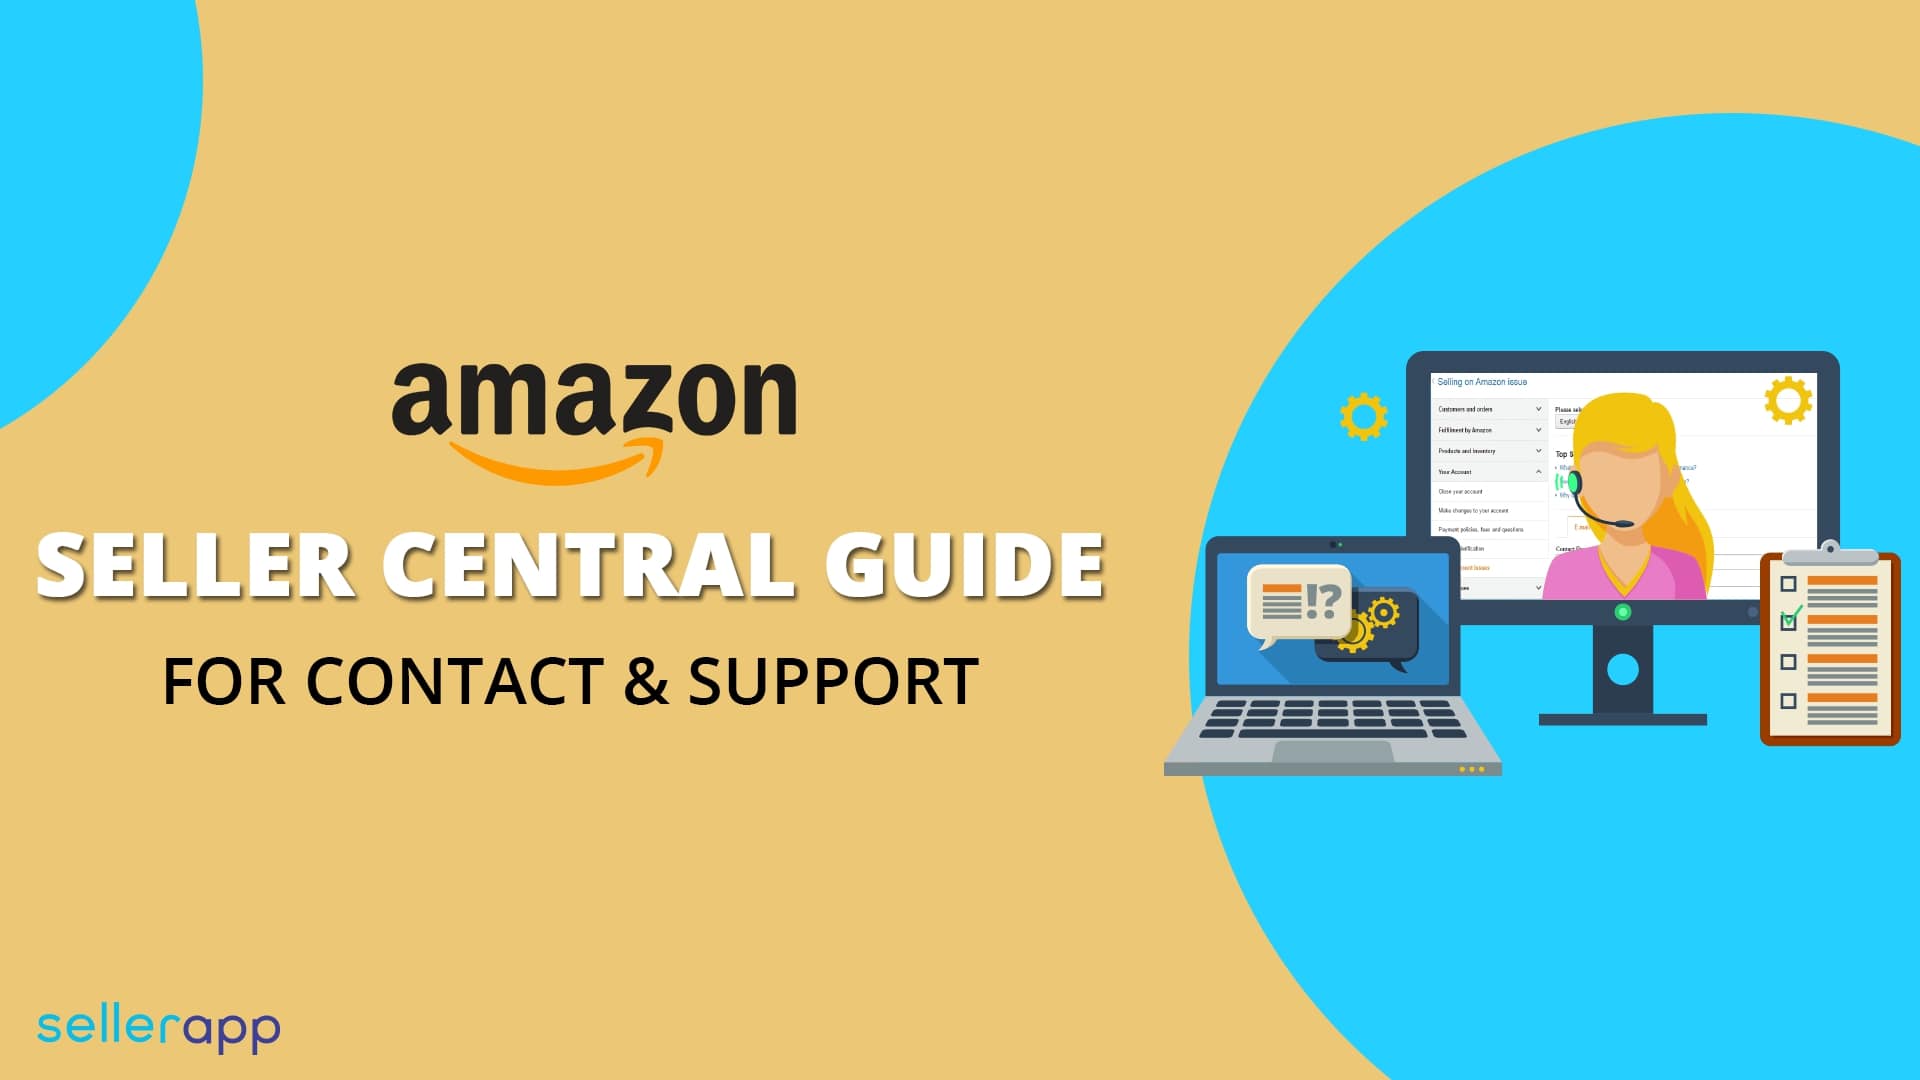 https://www.sellerapp.com/blog/wp-content/uploads/2019/02/how-to-contact-amazon-seller-support.jpg